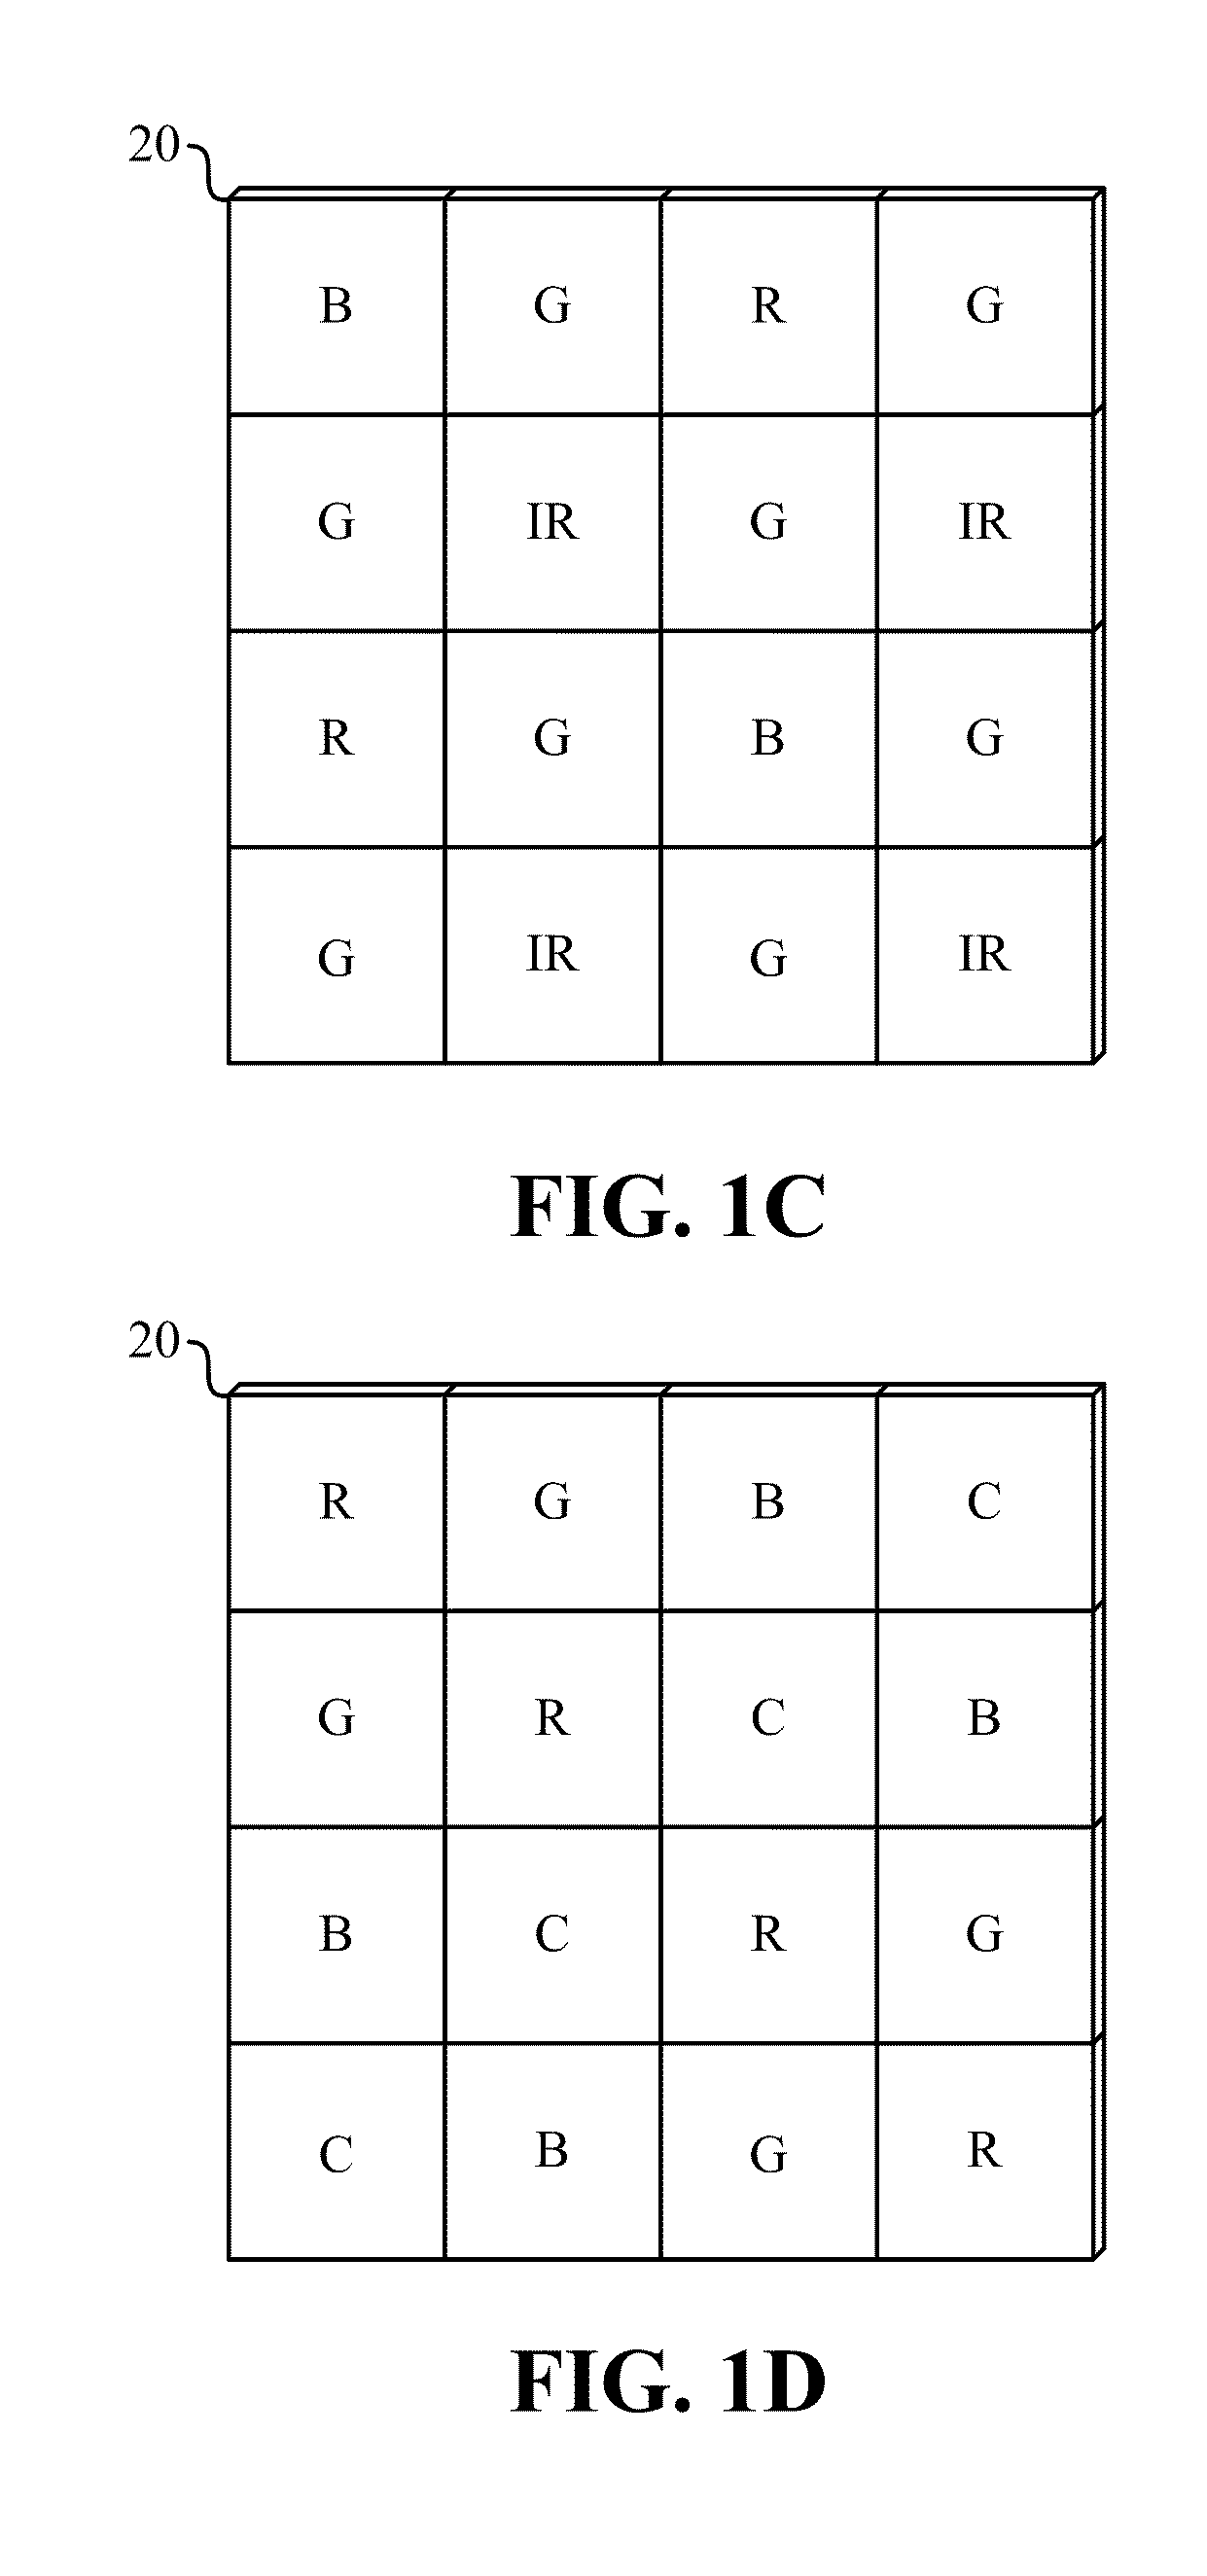 Image Sensing Device and Processing System